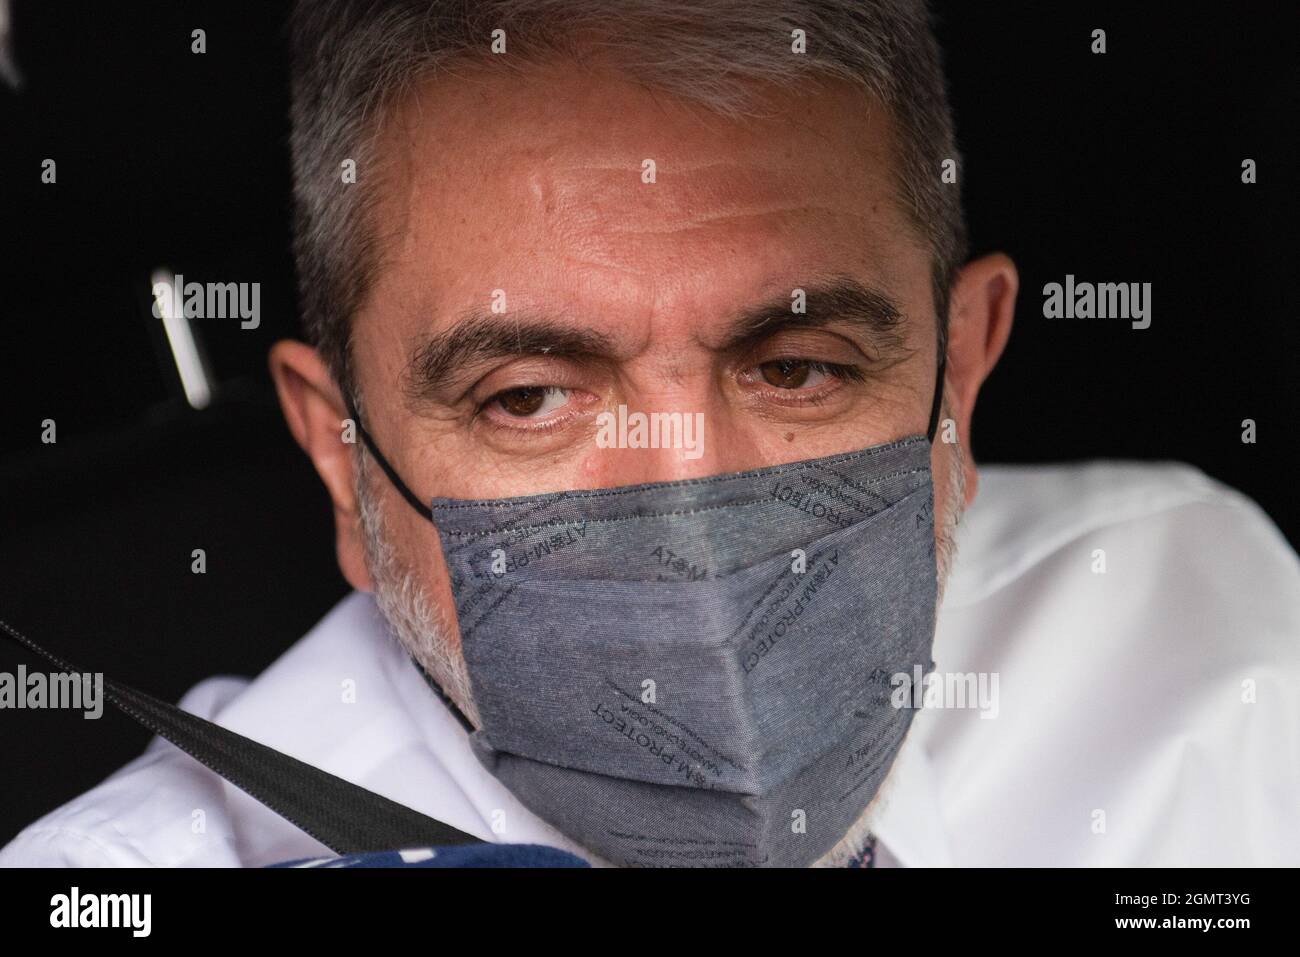 Buenos Aires, Argentina. 12th Feb, 2015. Argentina's Security minister Anibal Fernandez speaks to the press after taking an oath. After the Political Crisis of the Government of Alberto Fernandez in Argentina, ministers and officials were present at the swearing-in of the new Ministers held at the Government House in Buenos Aires, Argentina. (Photo by Manuel Cortina/SOPA Images/Sipa USA) Credit: Sipa USA/Alamy Live News Stock Photo